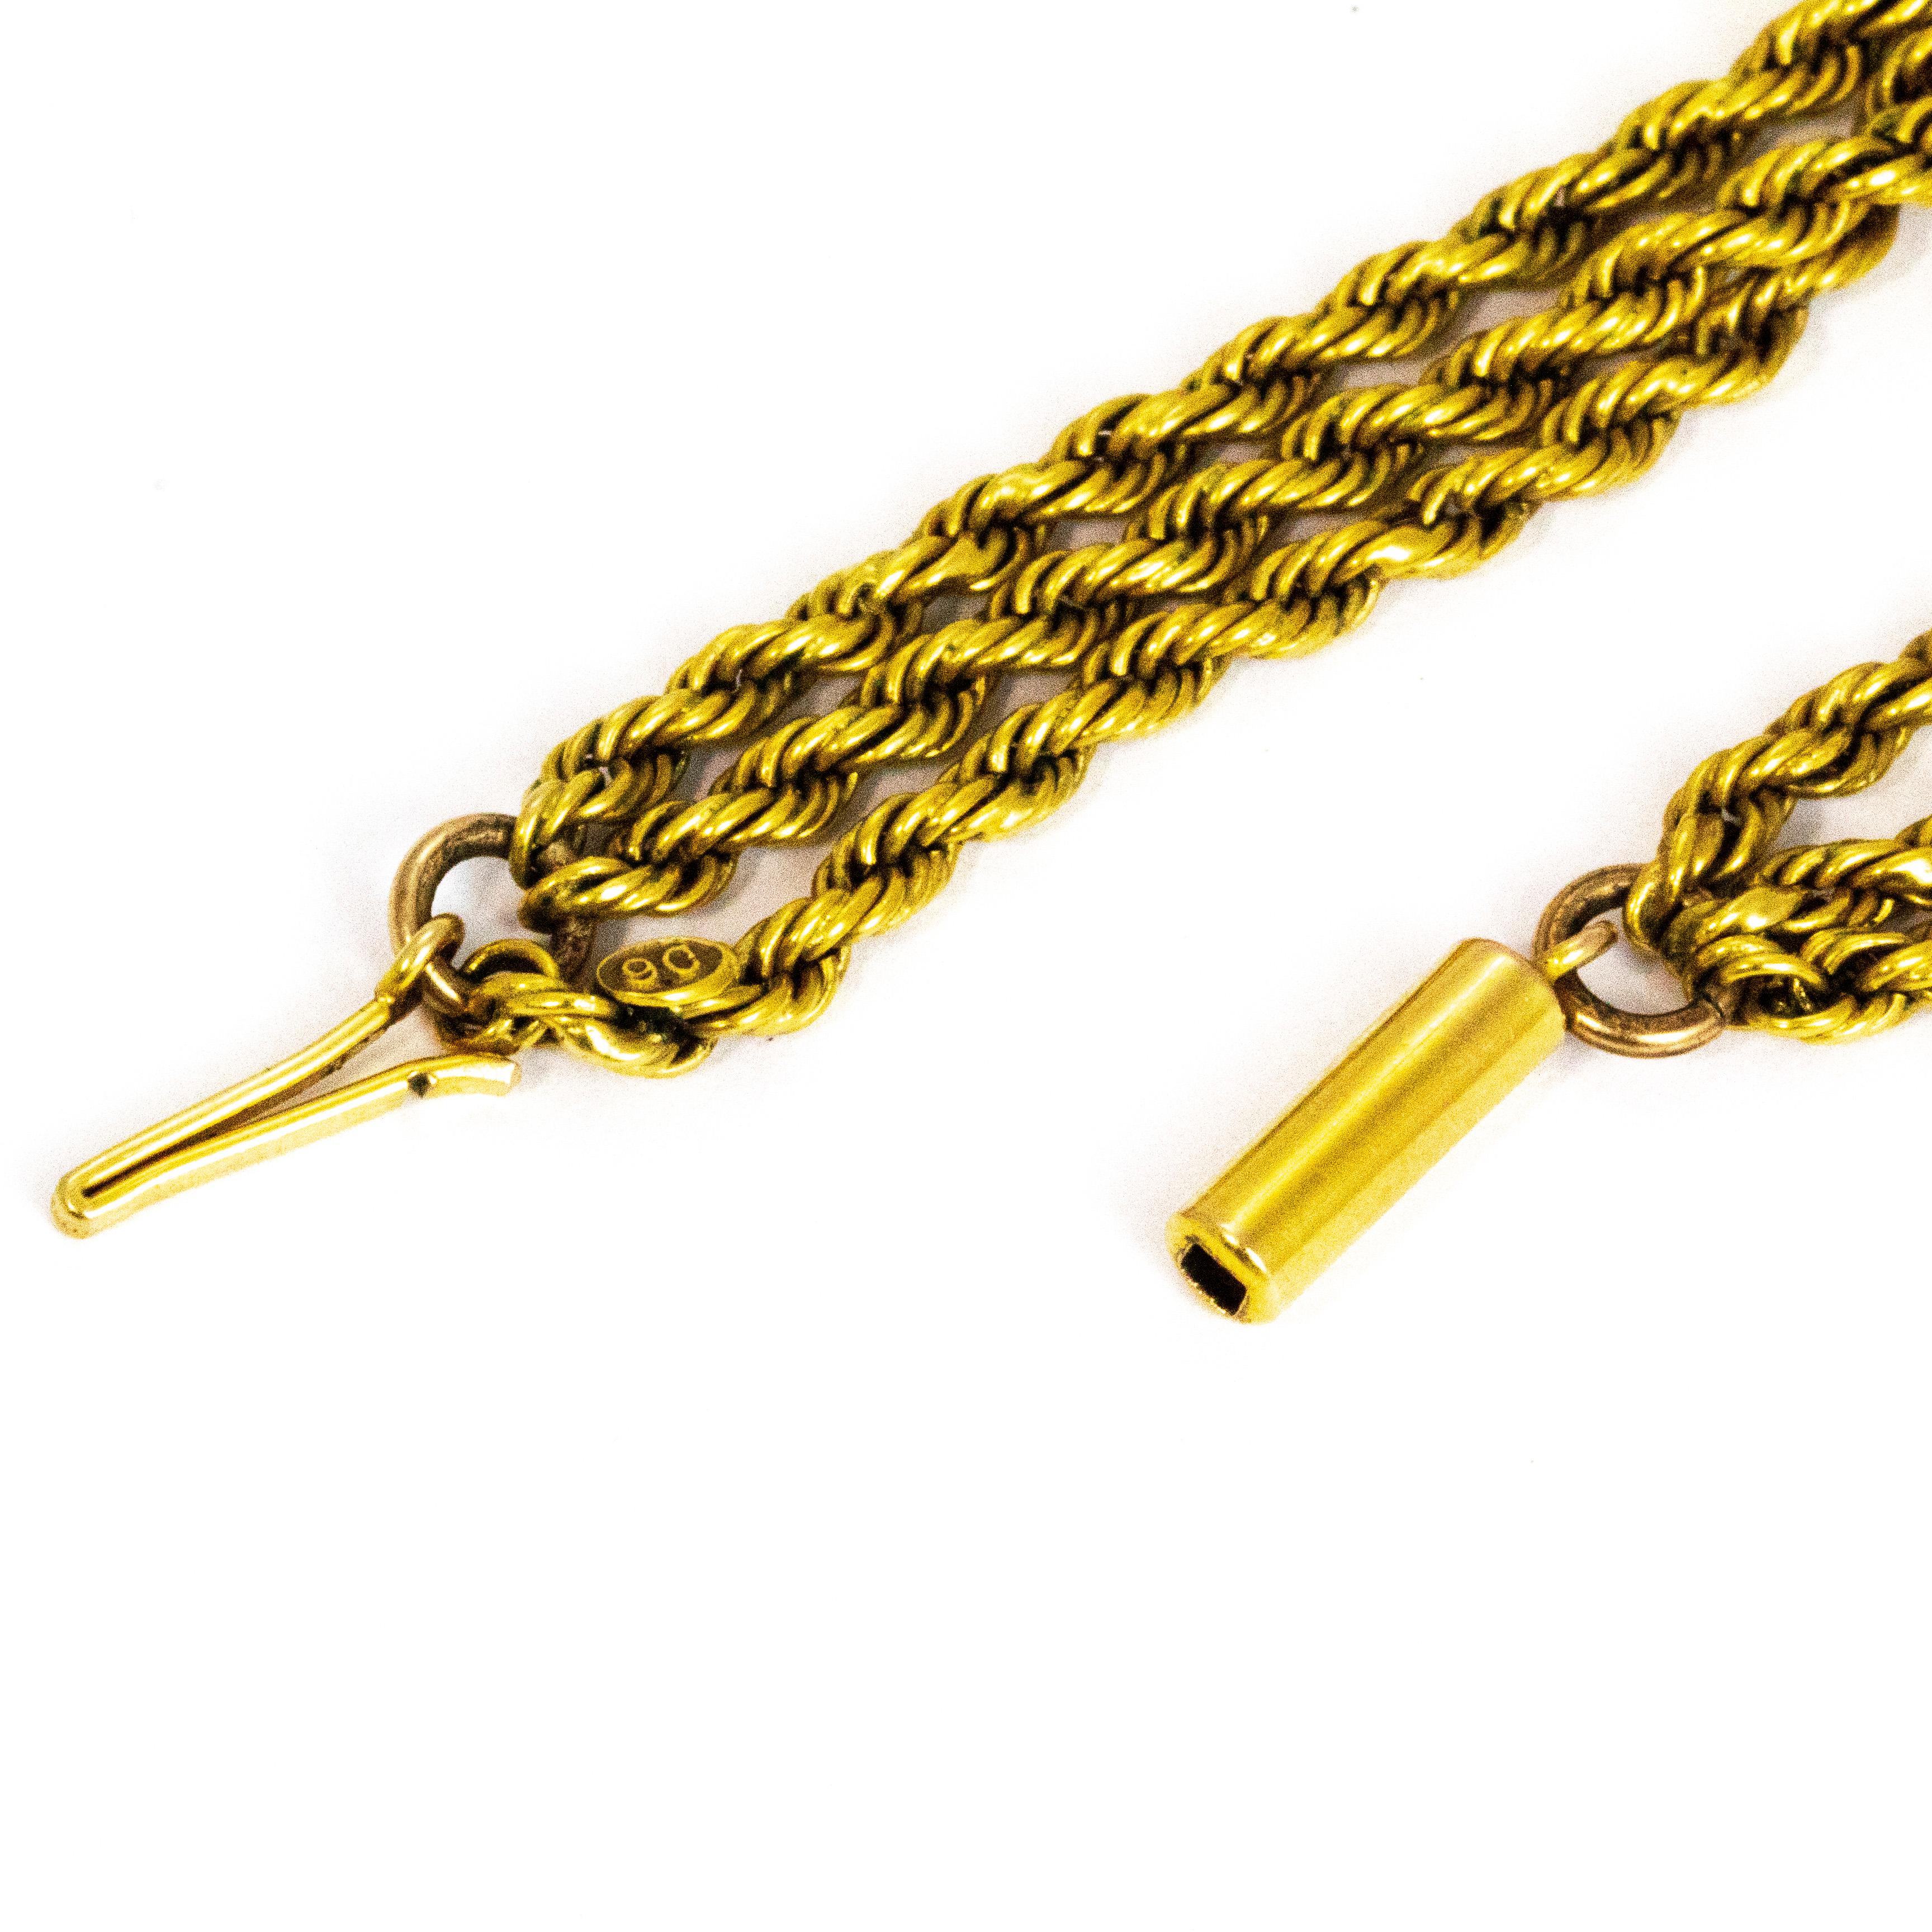 9 carat gold rope chain